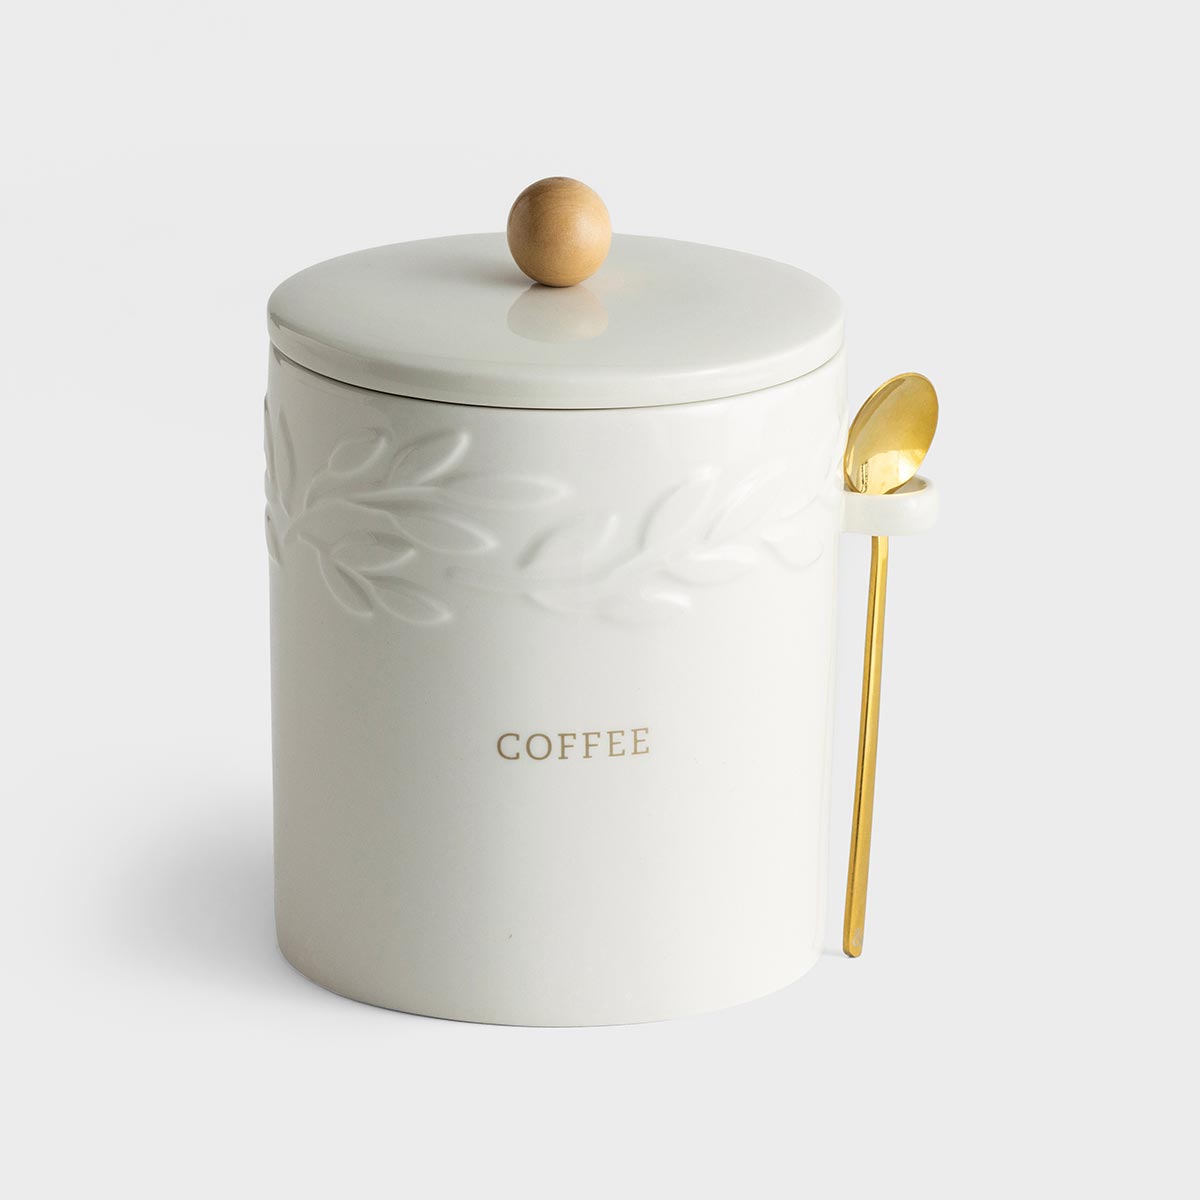 His Mercies Coffee Canister + Spoon